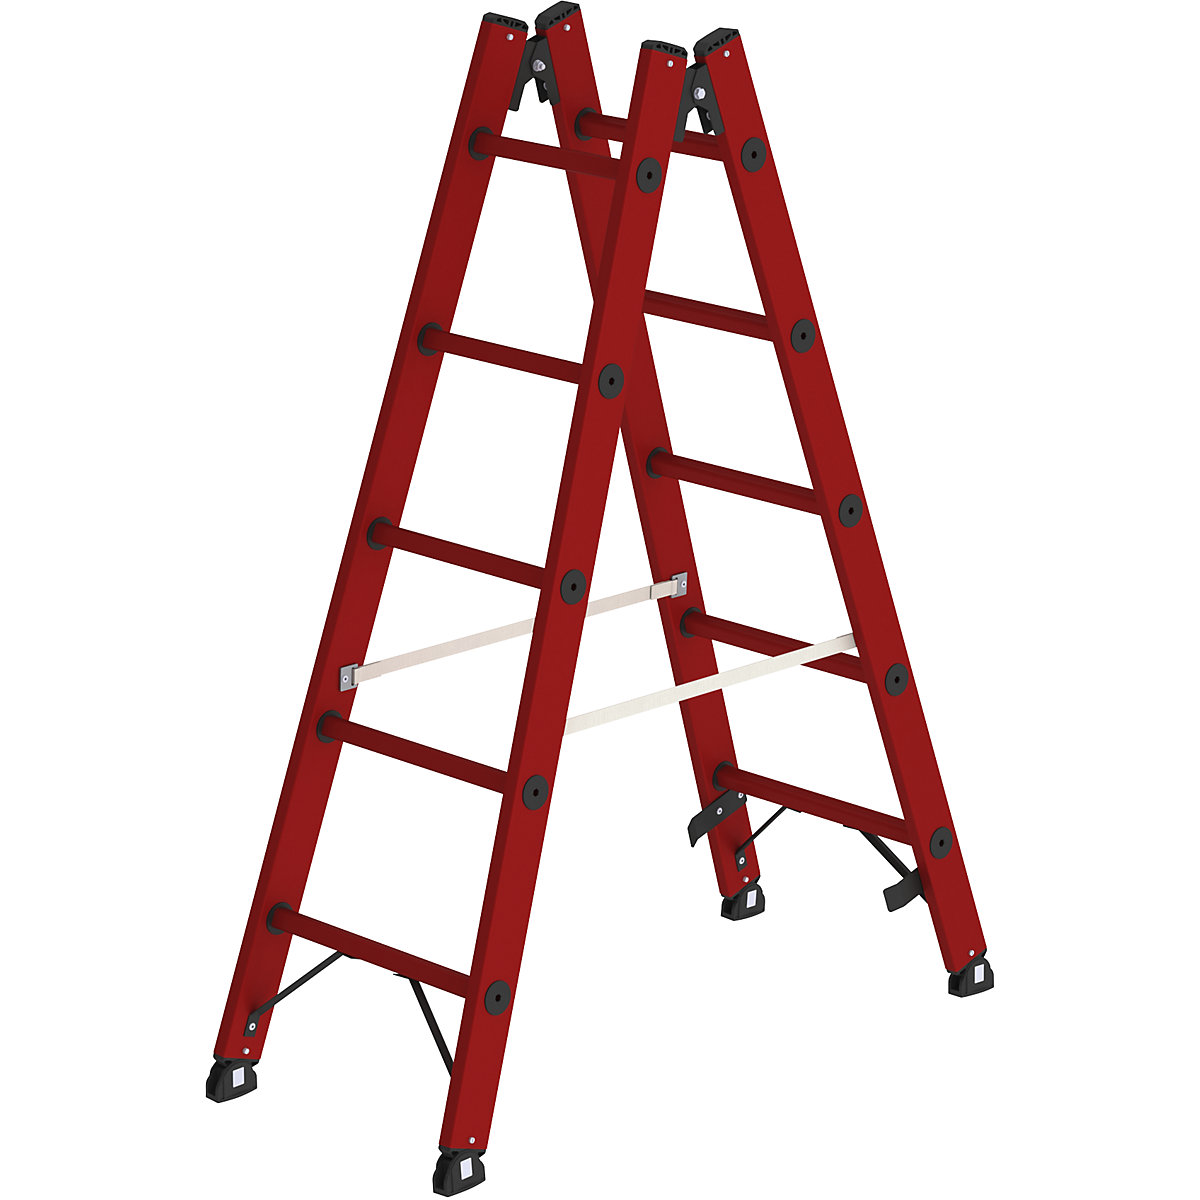 Solid plastic ladder – MUNK, made entirely of GRP, 2 x 5 rungs-8